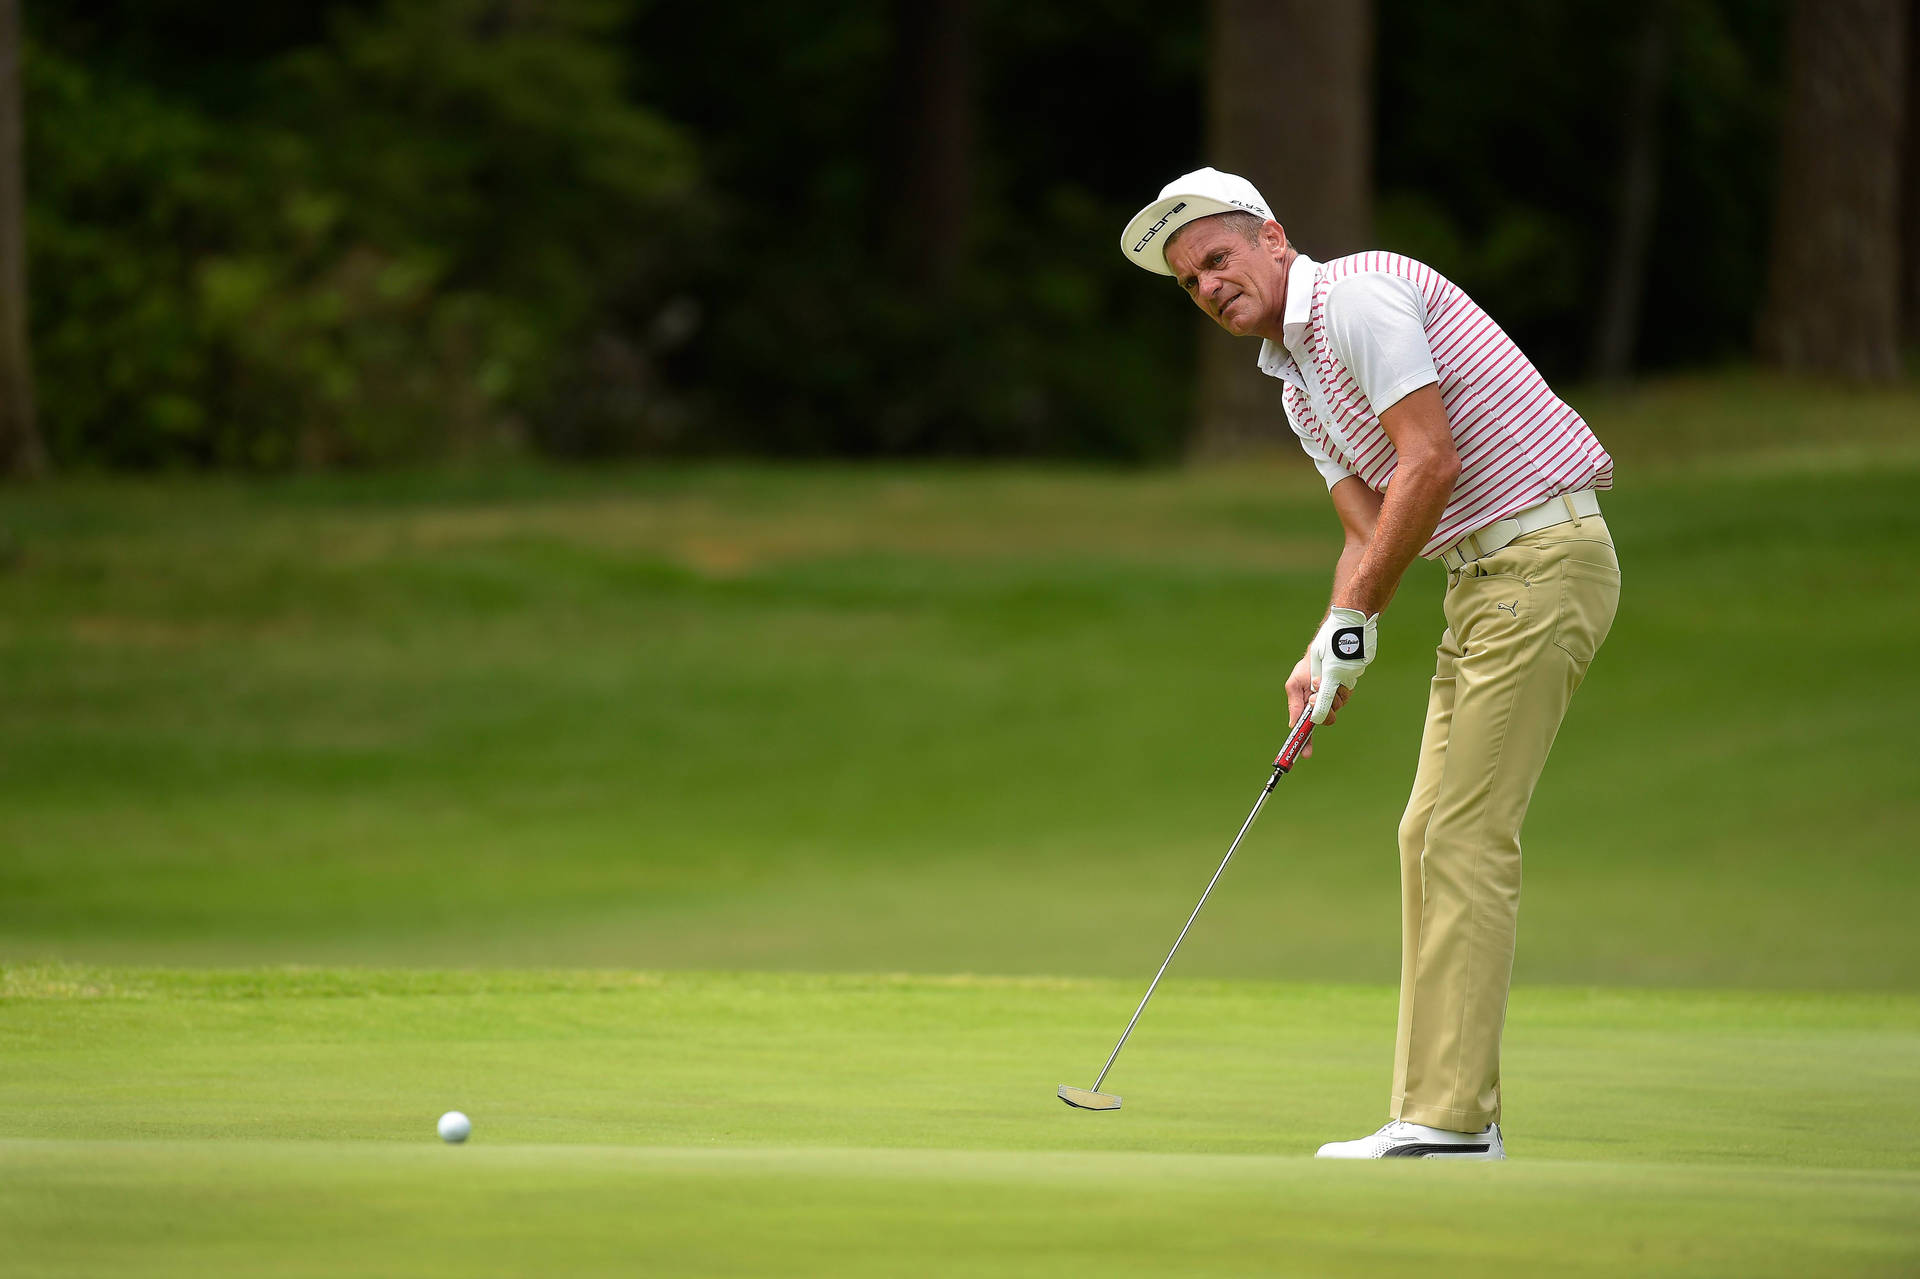 Jesperparnevik Spelar Golf. (this Would Be A Simple Statement That Translates To 